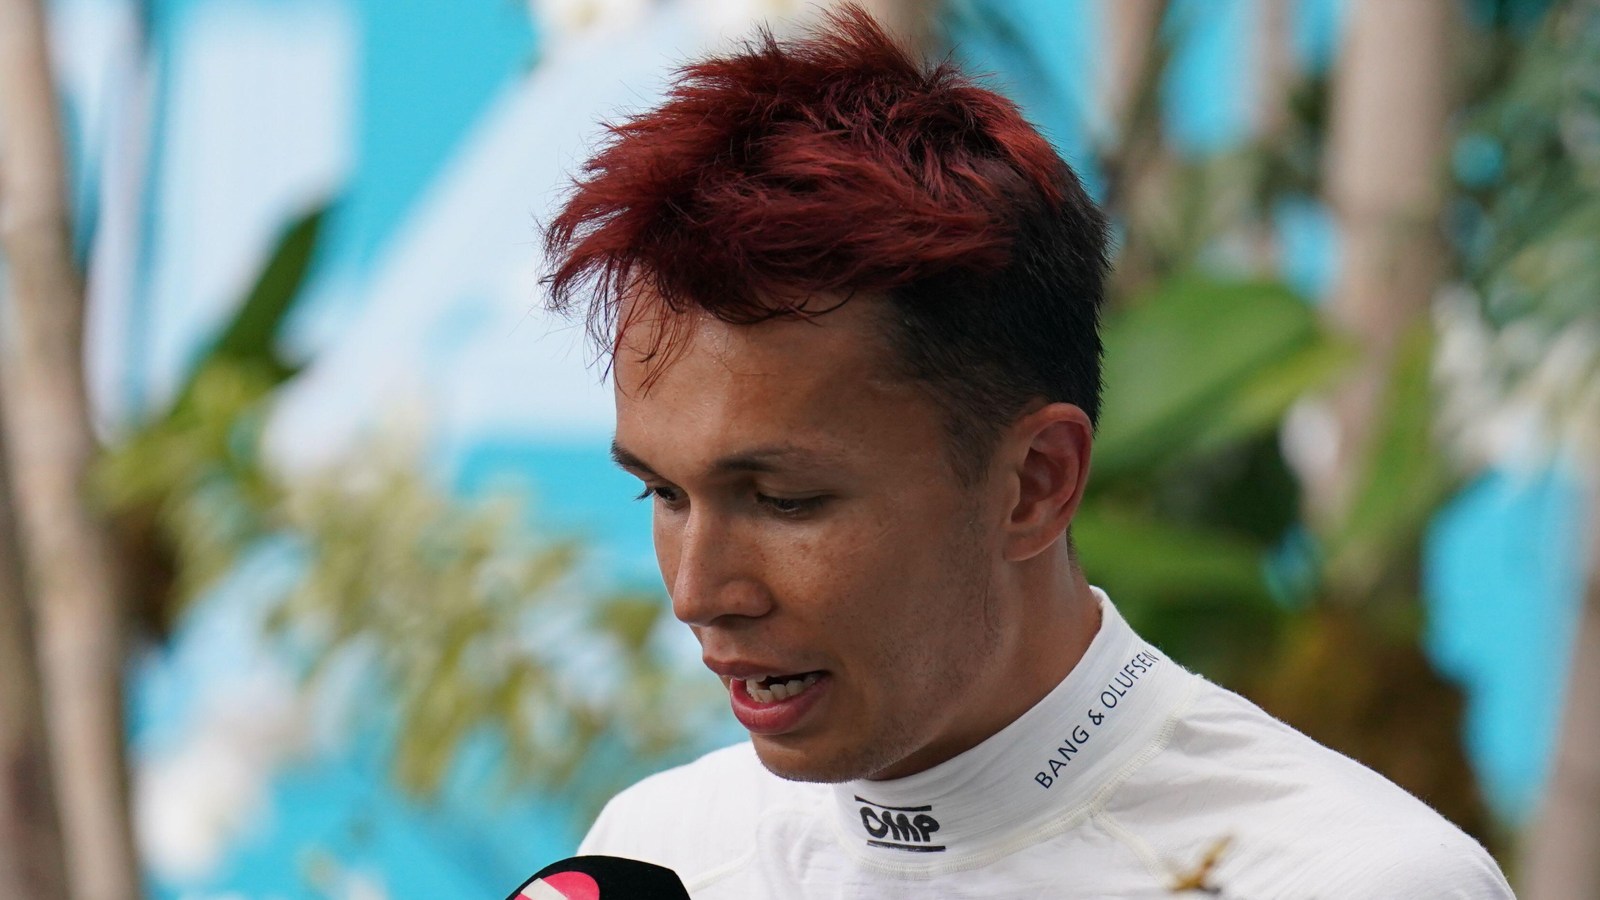 Alex Albon with red hair. Miami, May 2022.